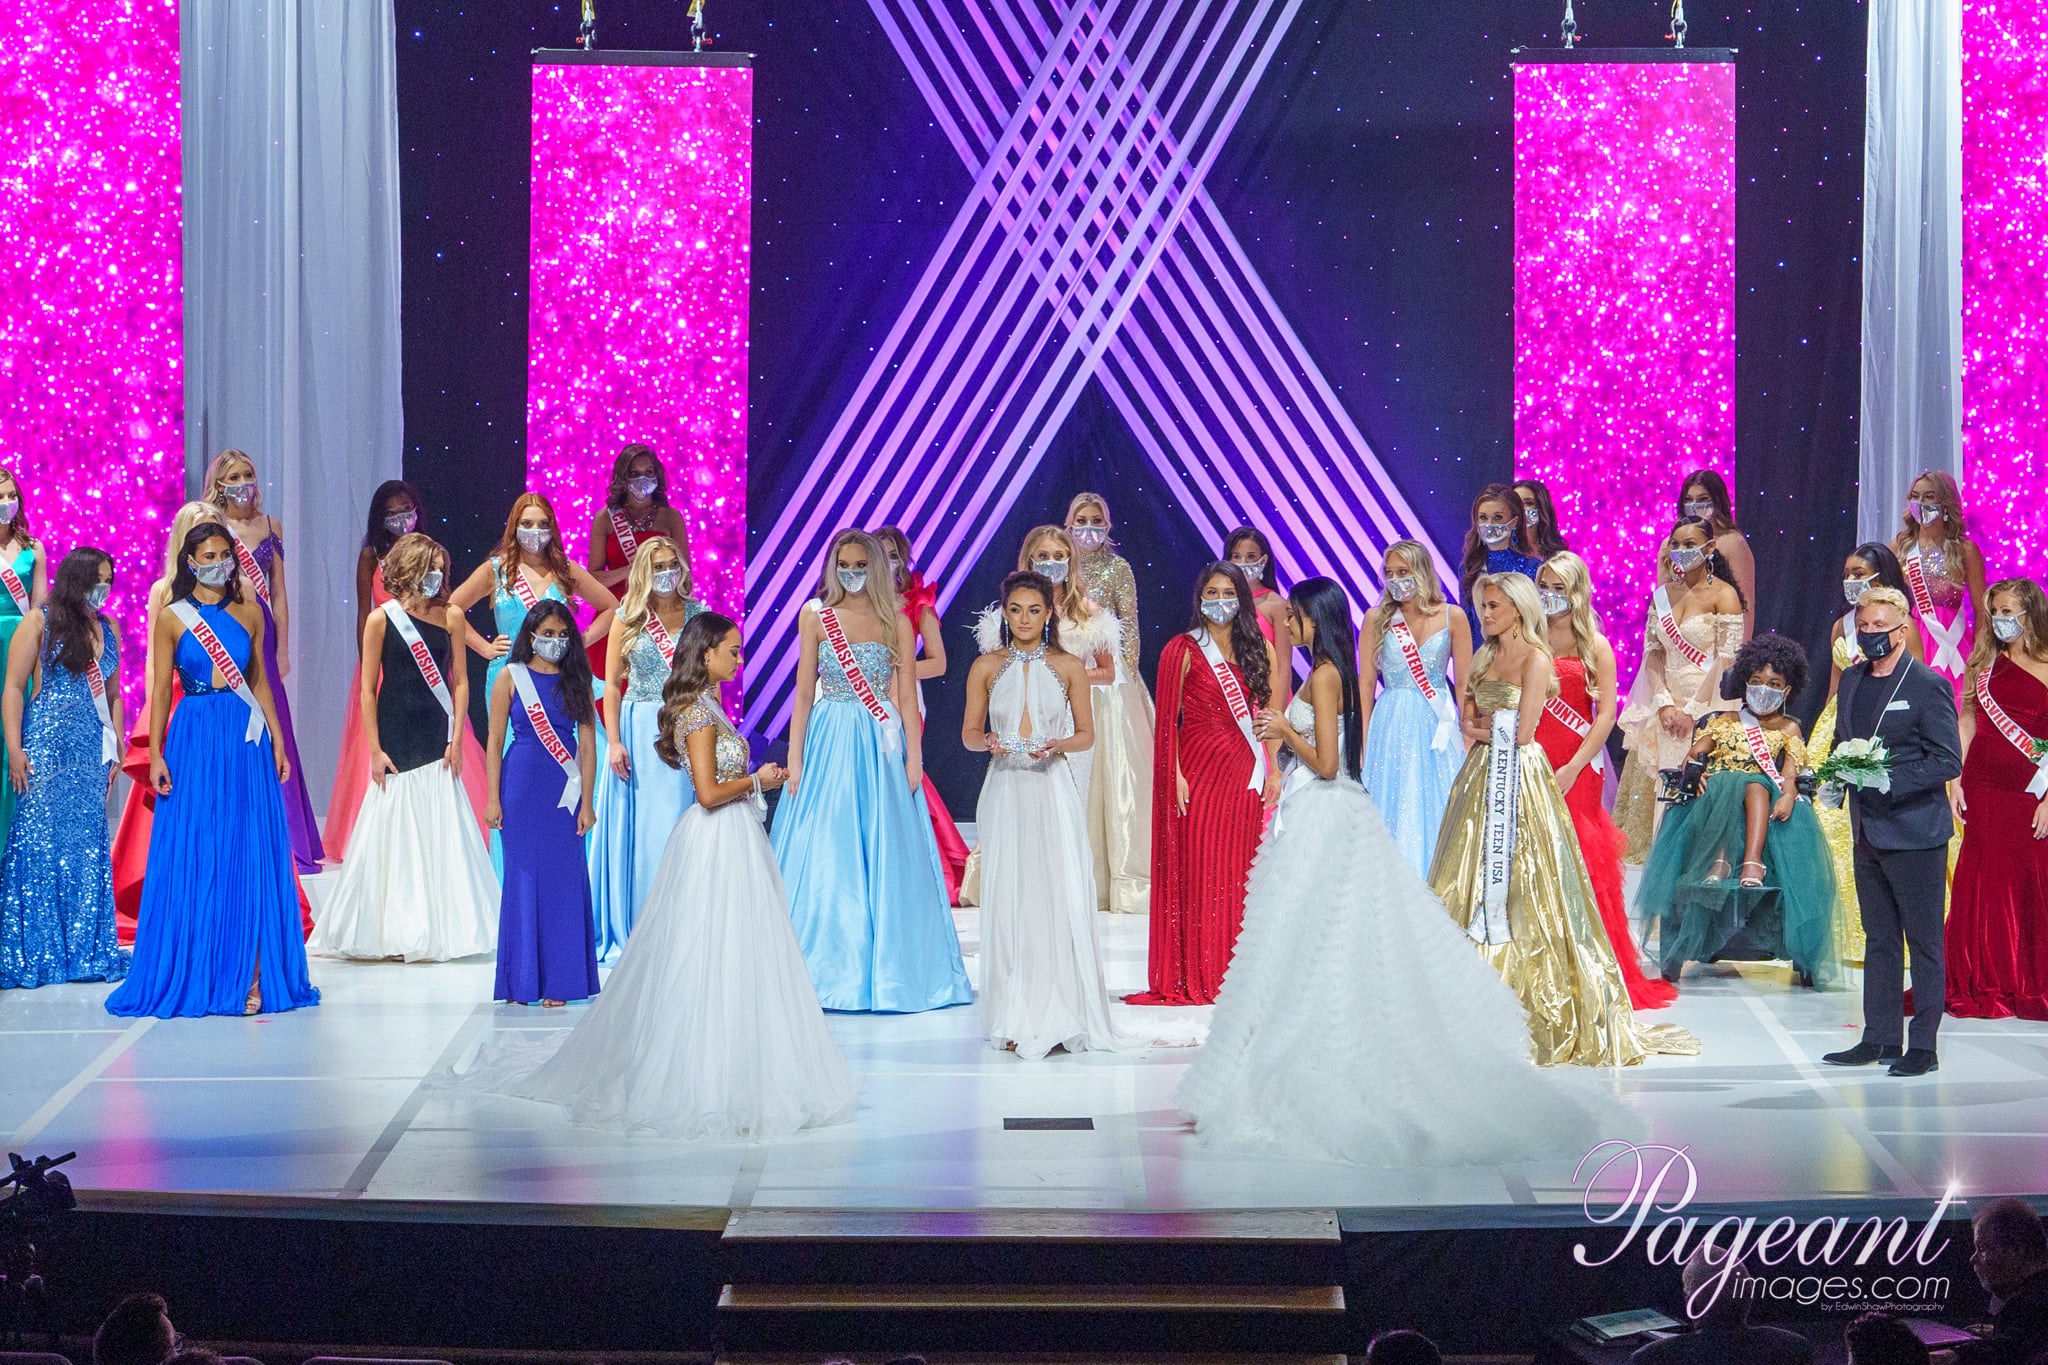 Kennedy Mosley is crowned Miss Kentucky Teen USA 2021